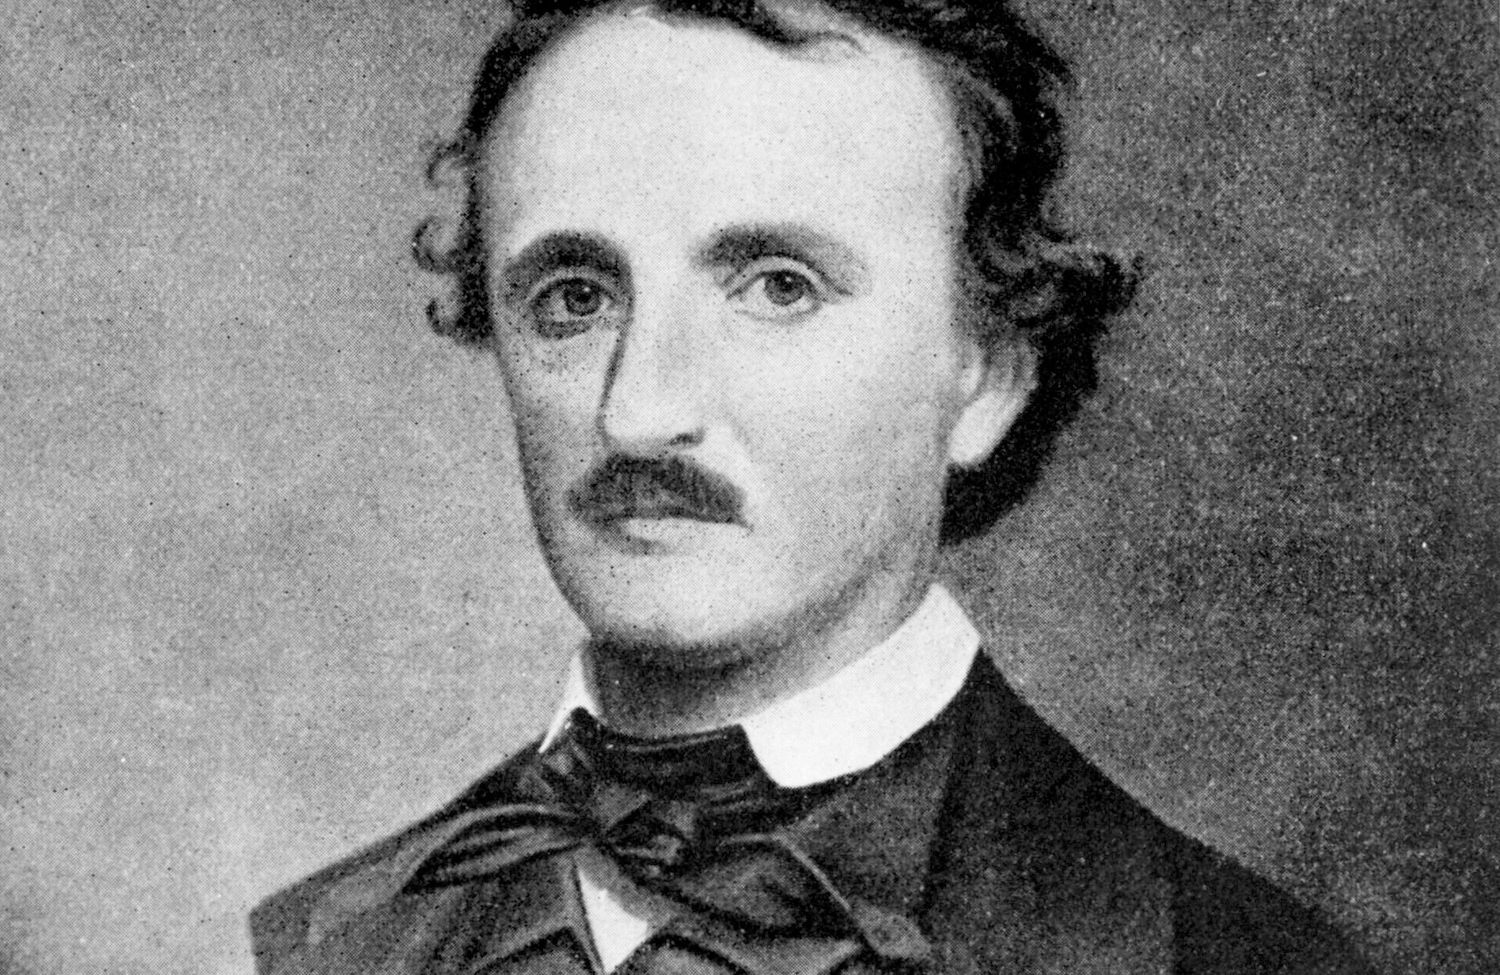 Edgar Allan Poe: Odd and interesting facts about the dark and